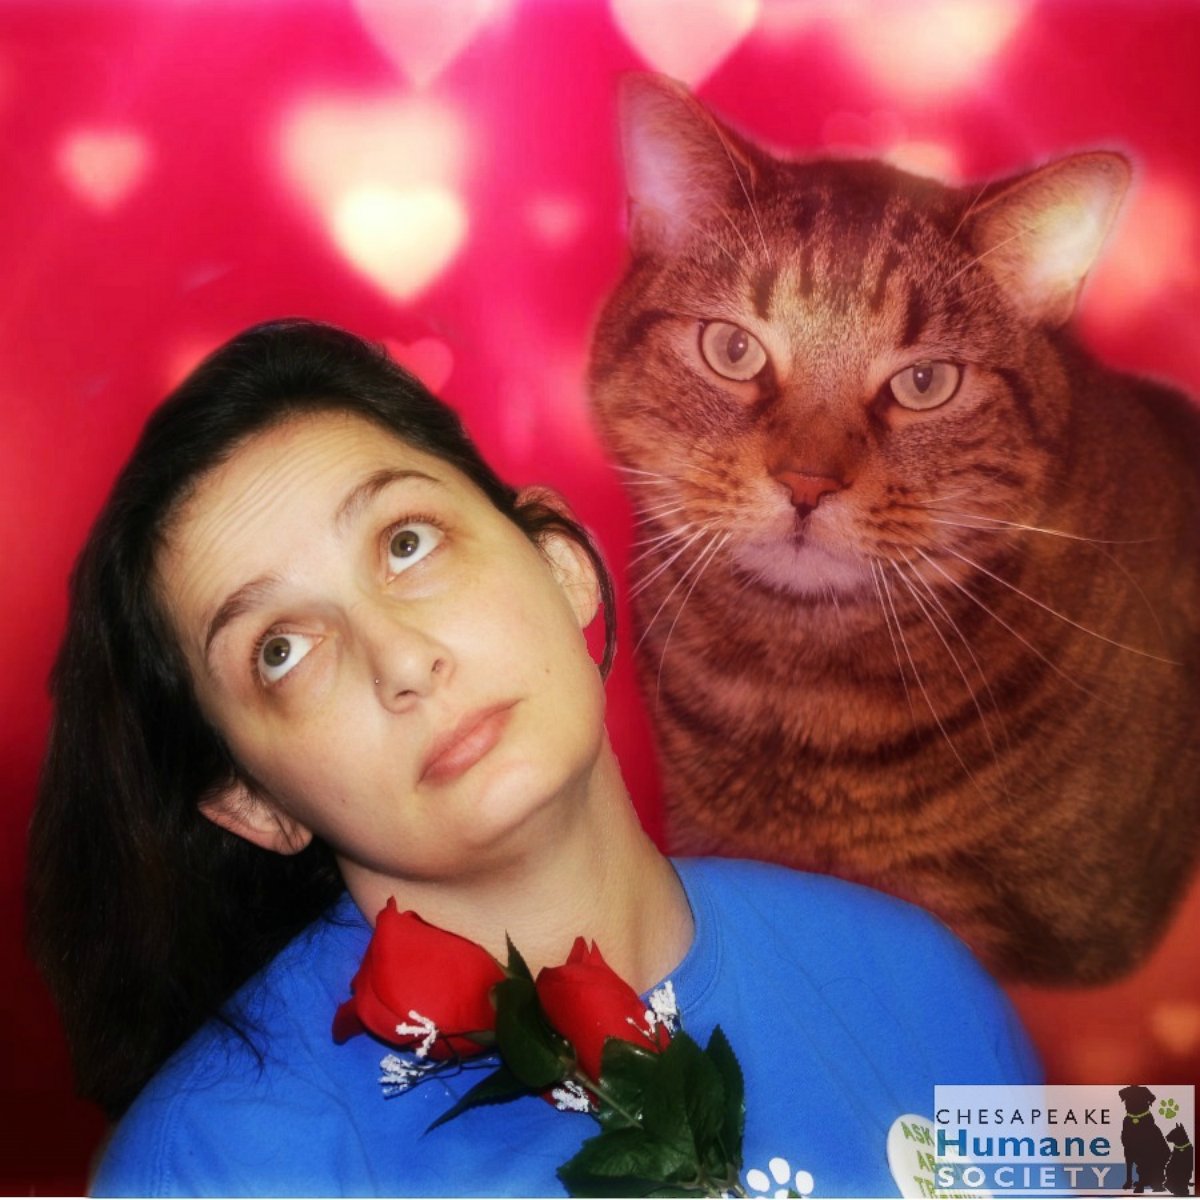 PHOTO: The Chesapeake Humane Society gave their cats retro glamour shots in hopes of getting them adopted.